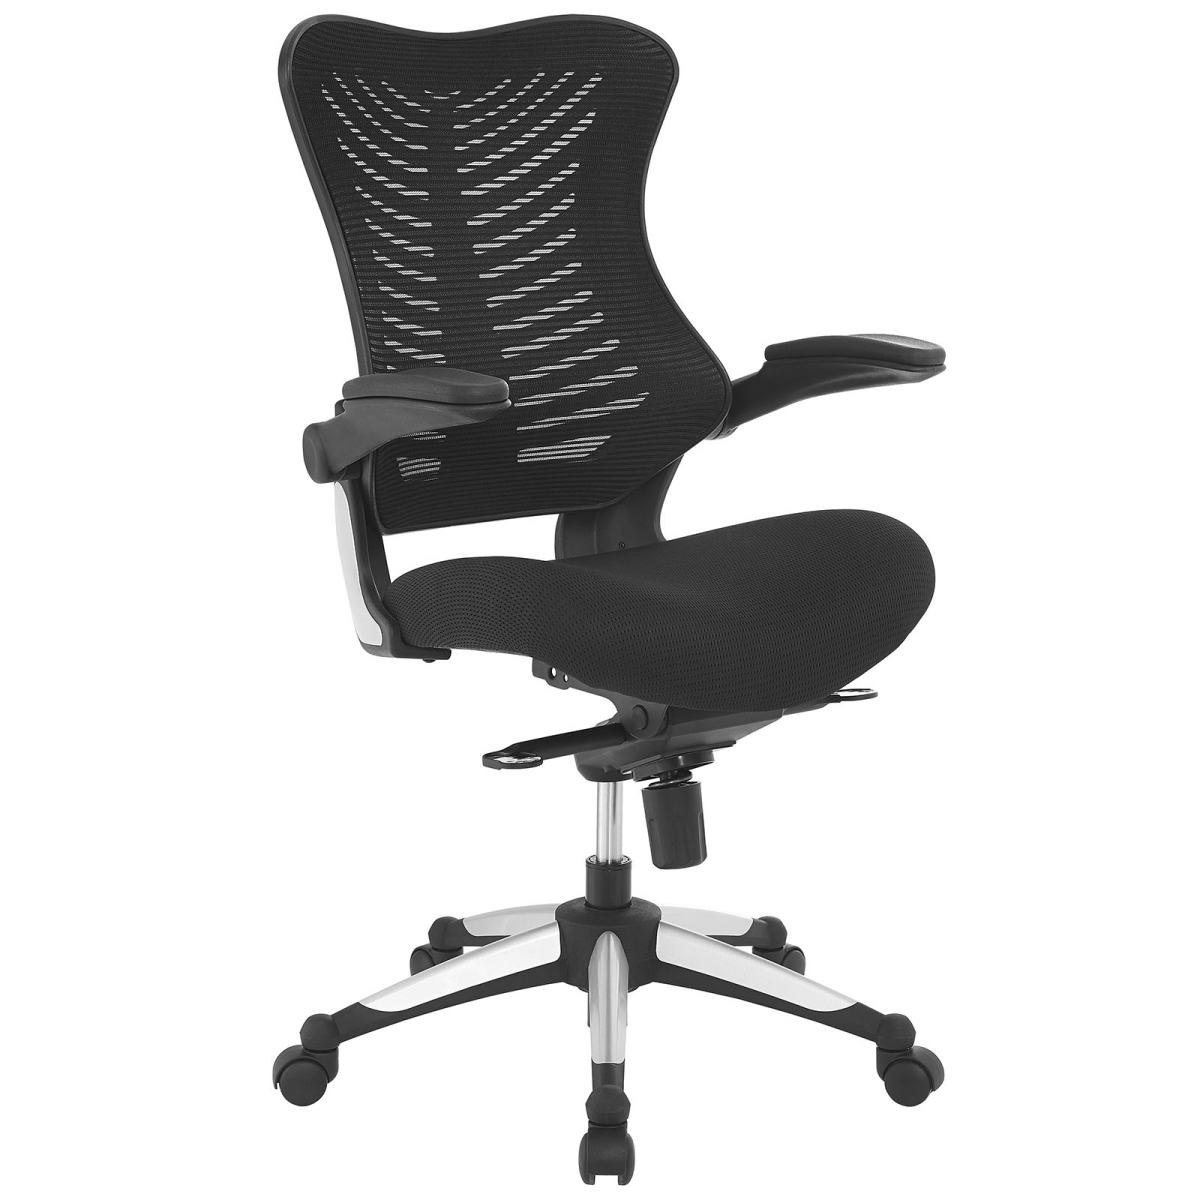 Modway Eei-2285-blk 42 H X 27.5 W X 26.5 L In. Charge Office Chair, Black